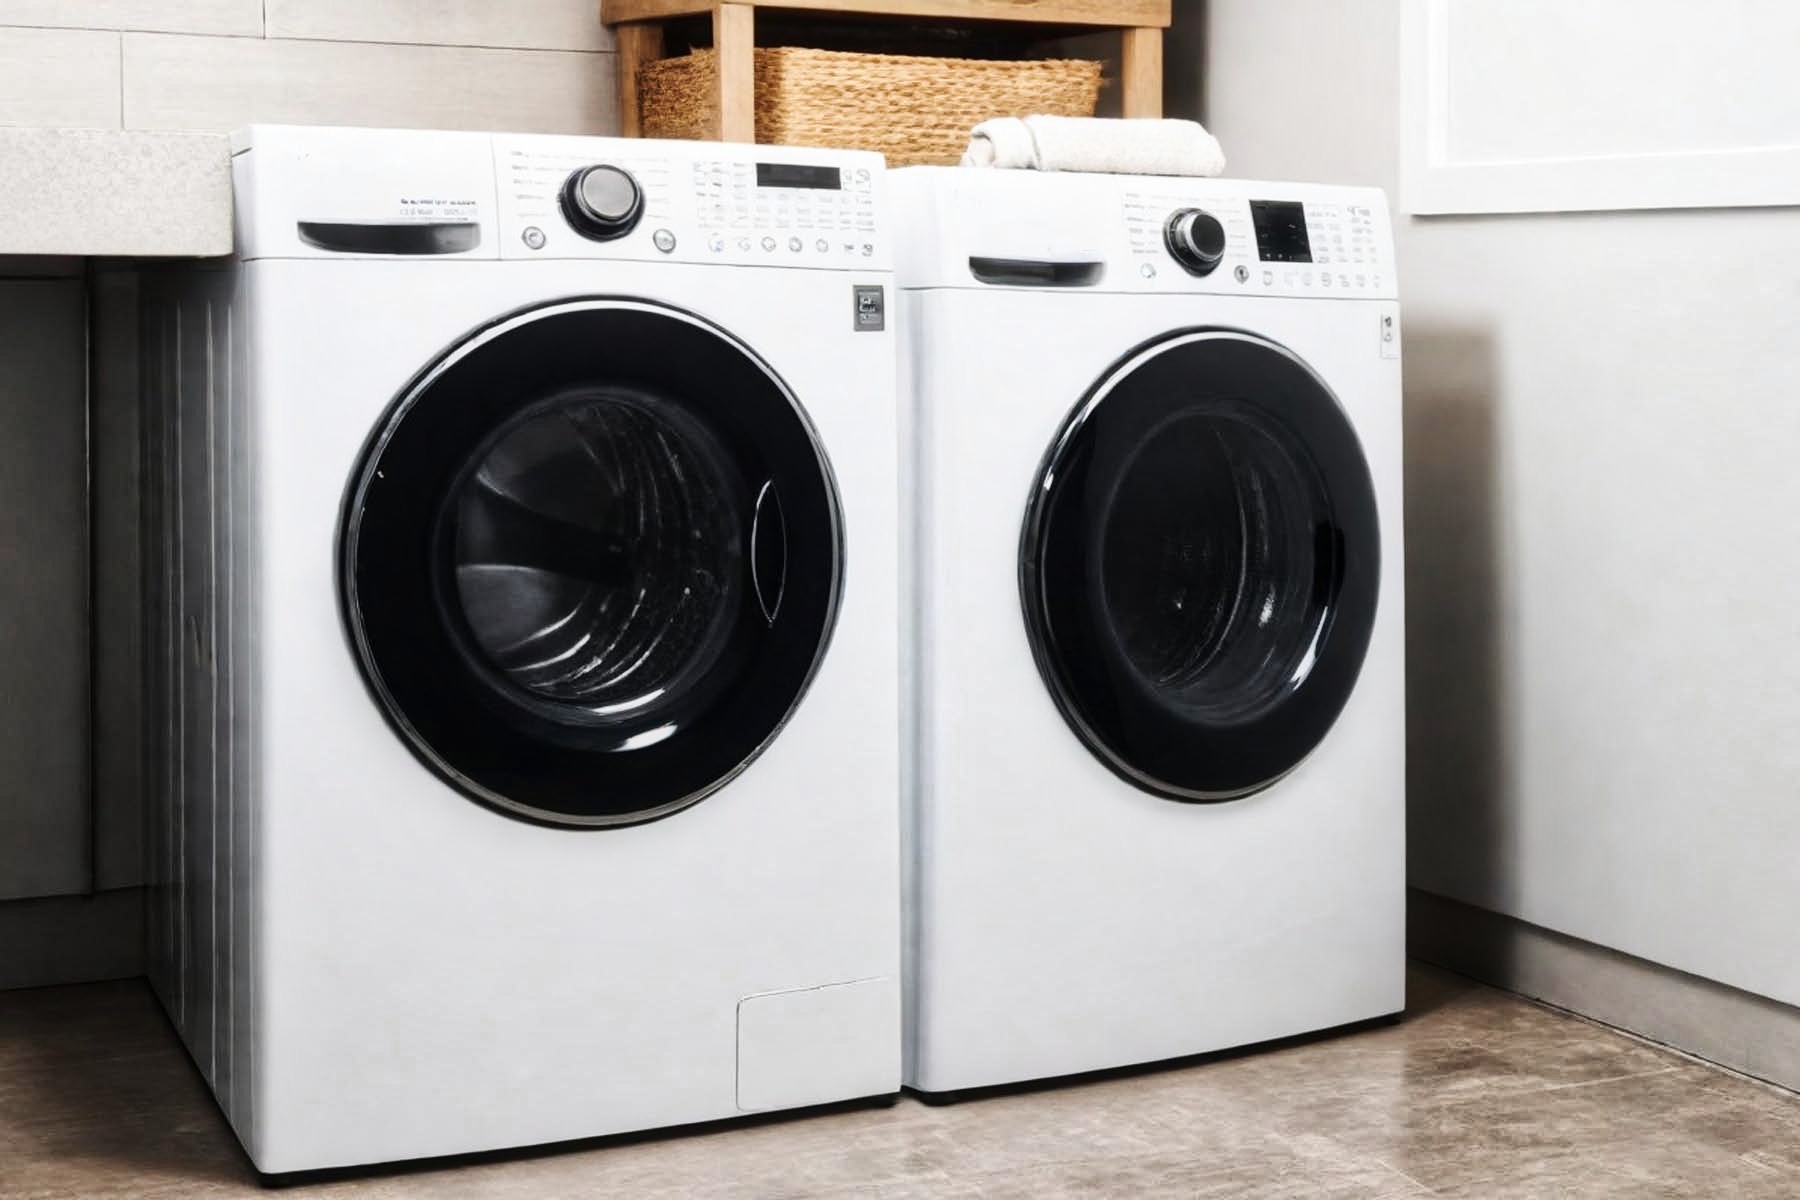 Georgetown Appliance Repair: Expert washer and dryer repair services for seamless maintenance